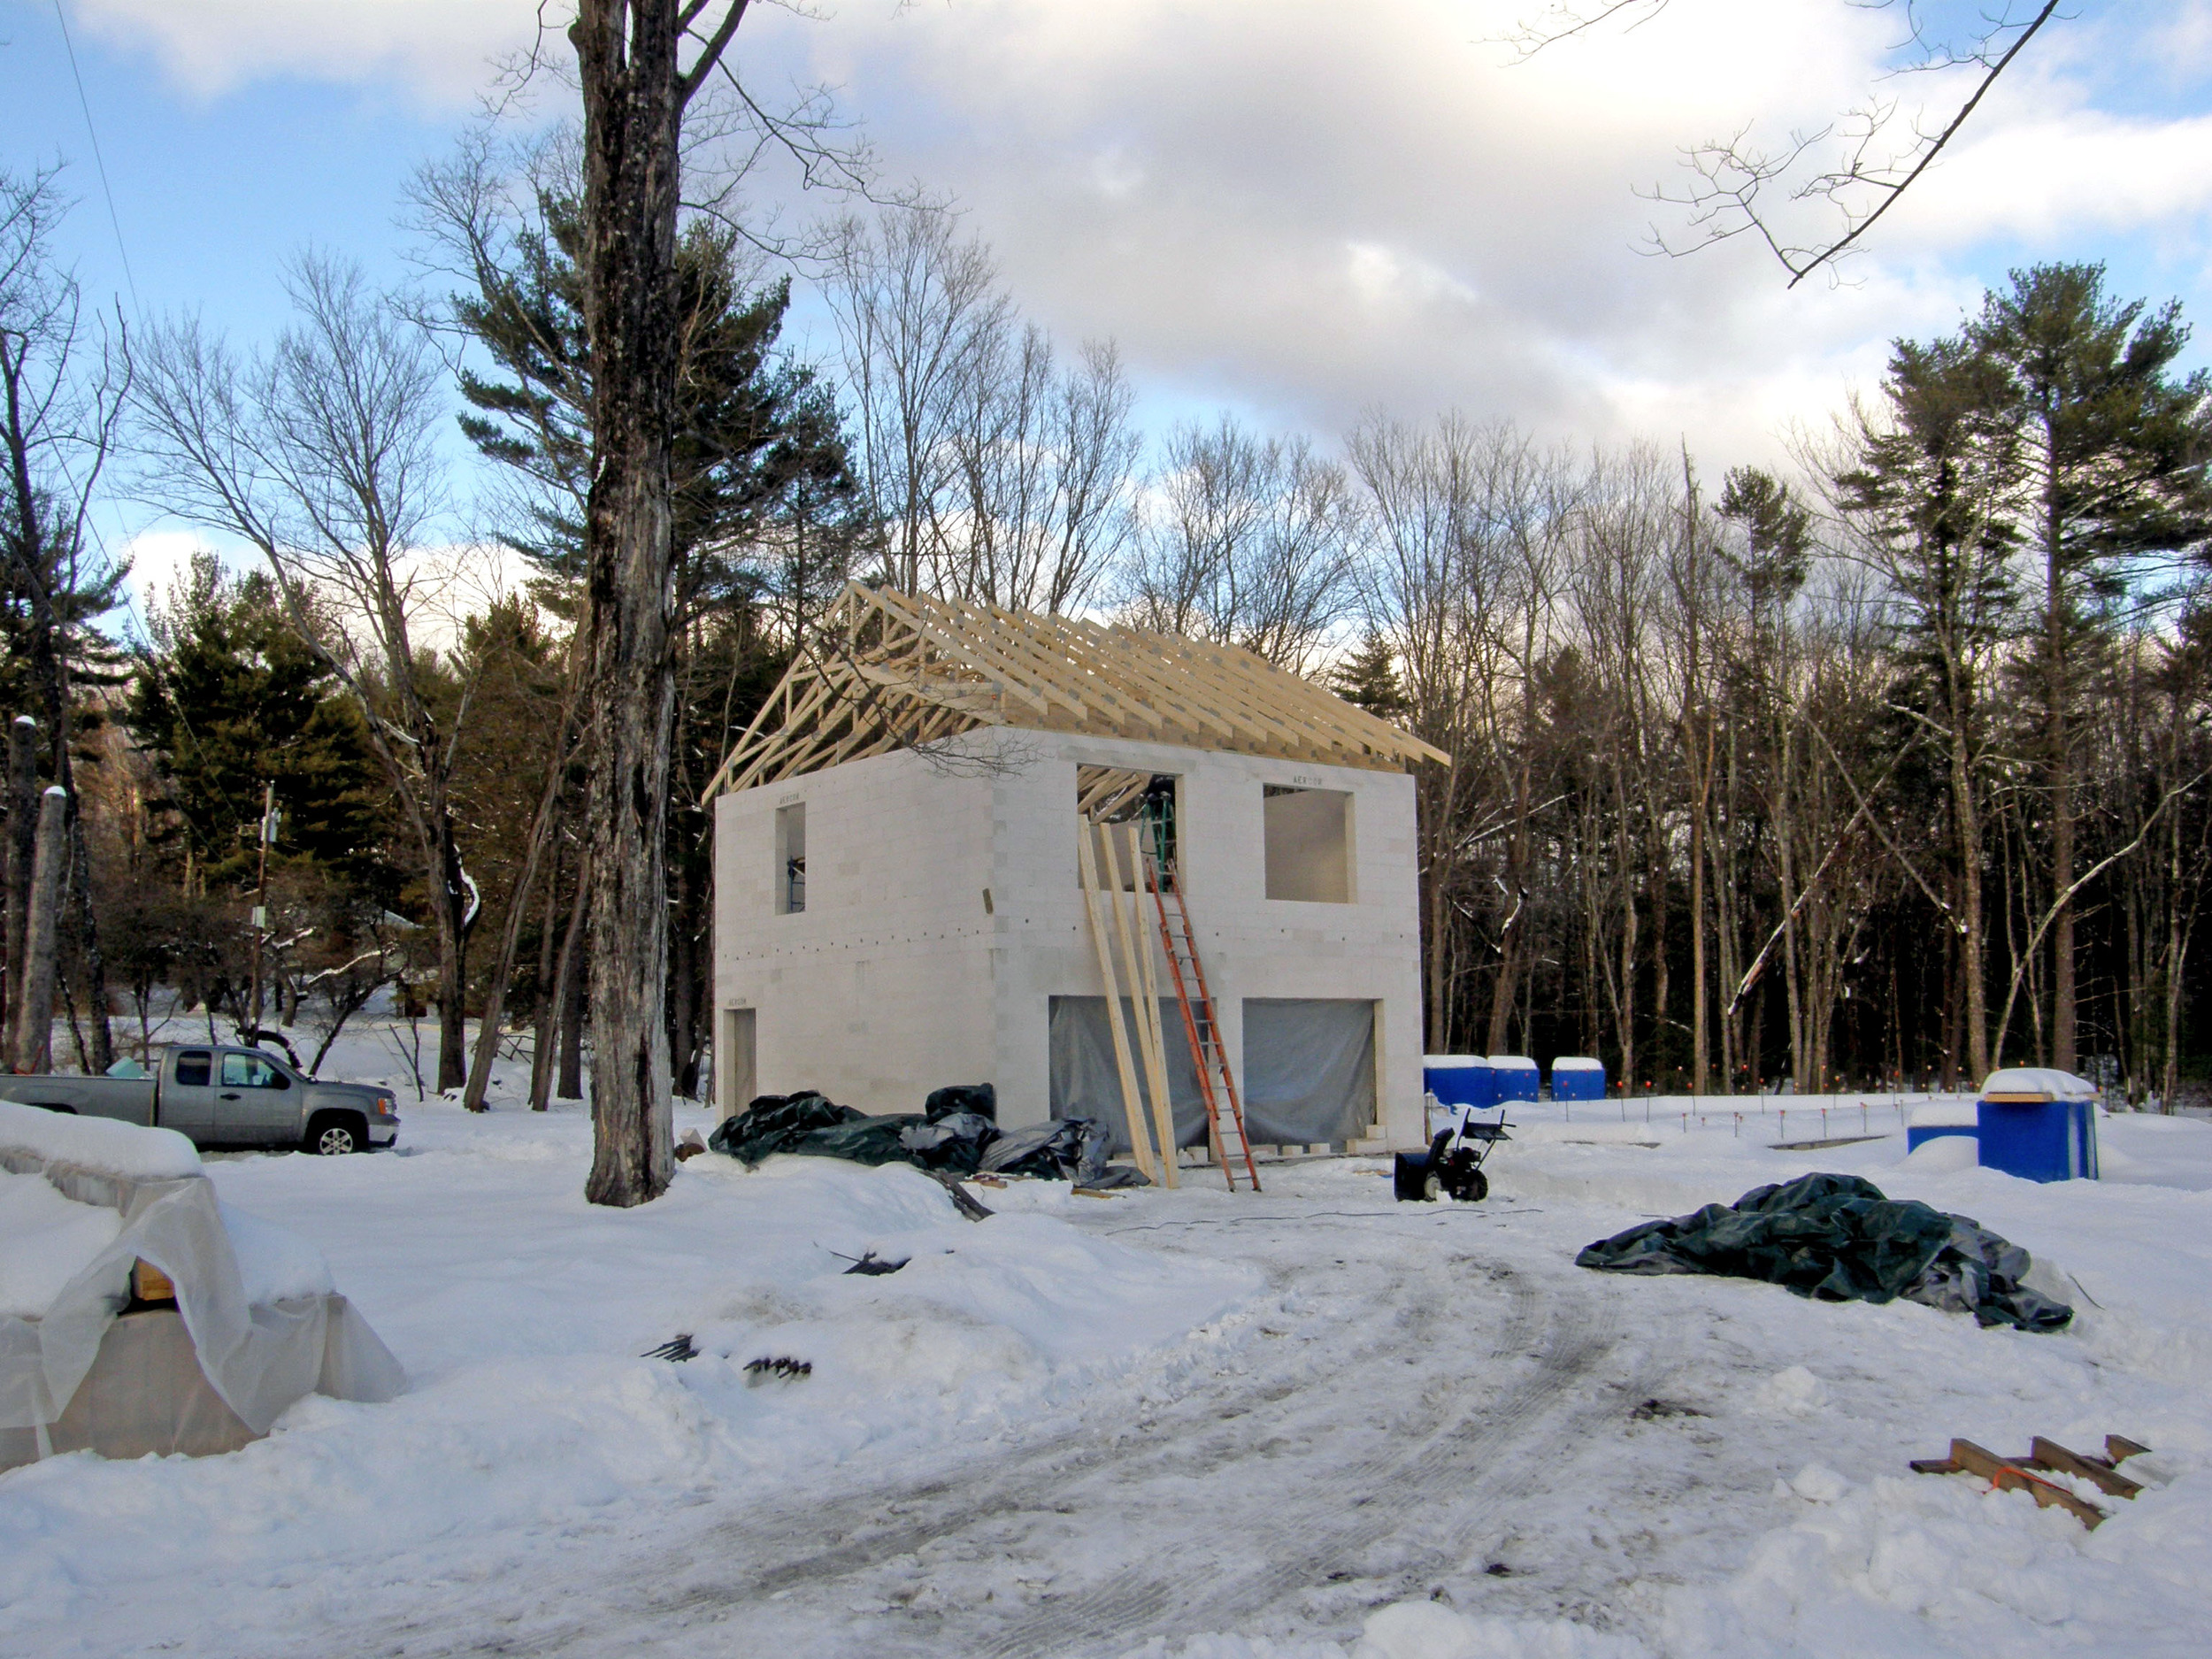 2015-2-10 garage with roomf structure.JPG